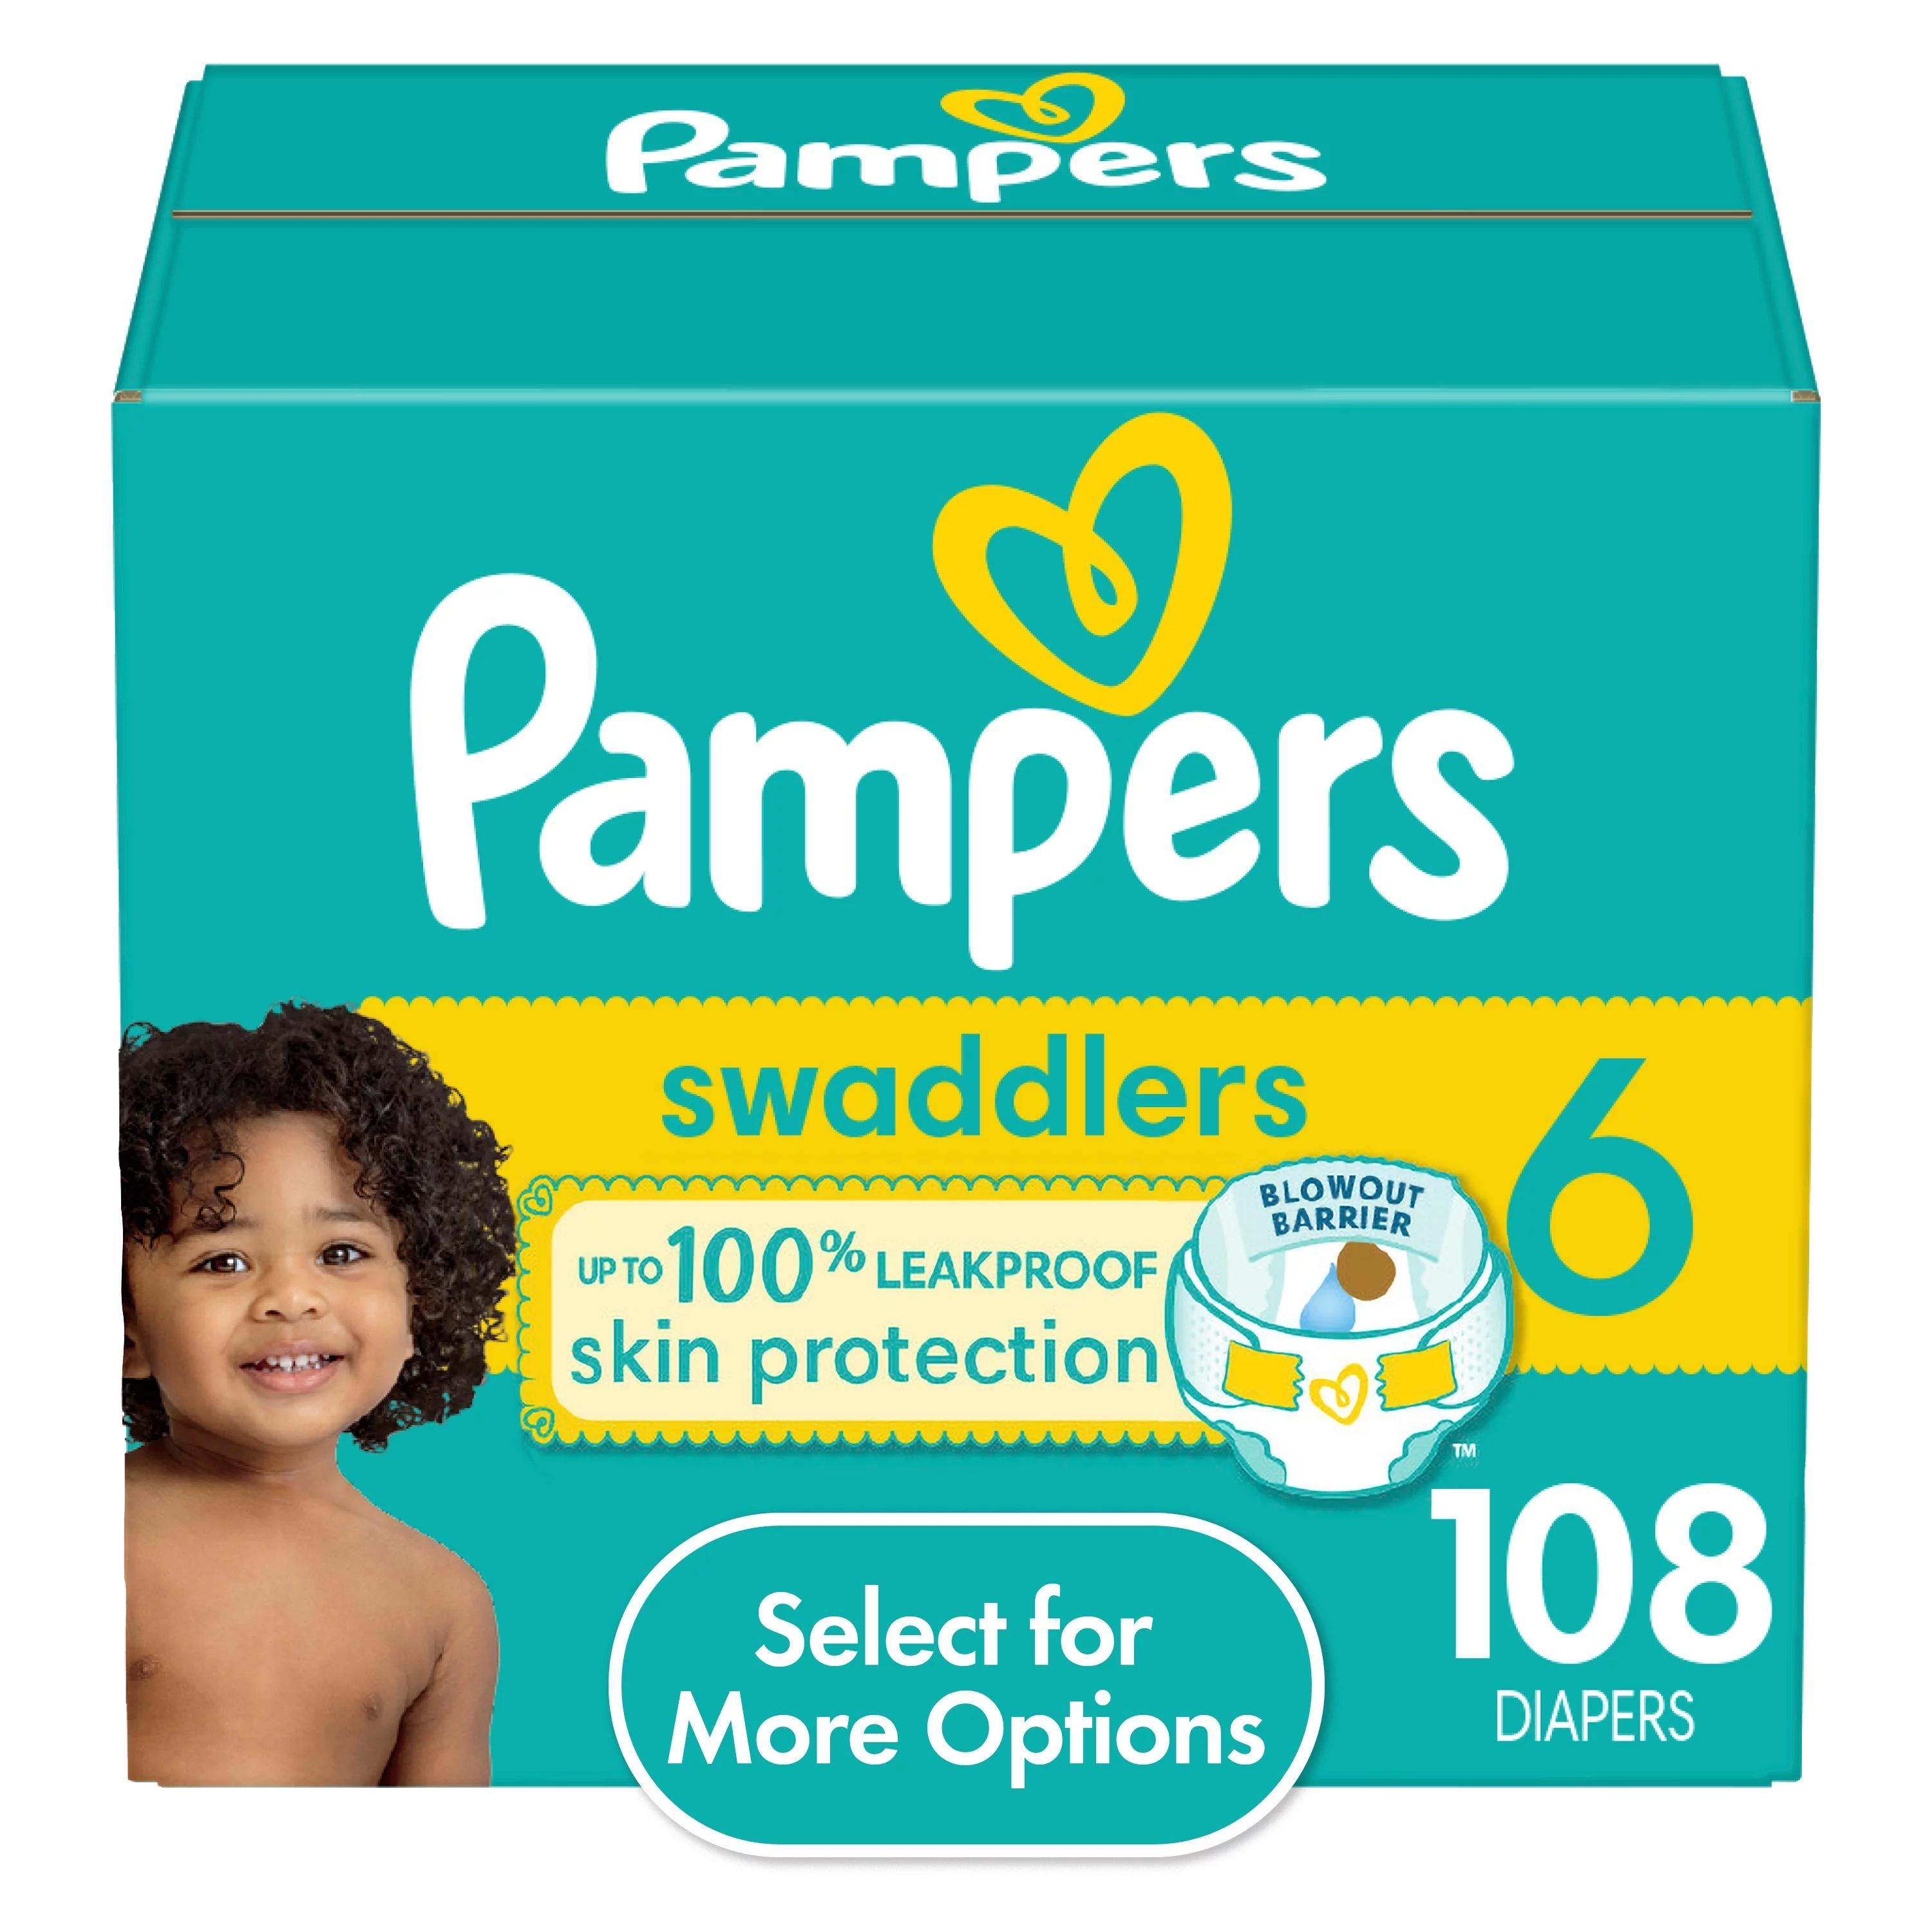 Pampers Swaddlers Diapers Size 6, 108 Count (Select for More Options)